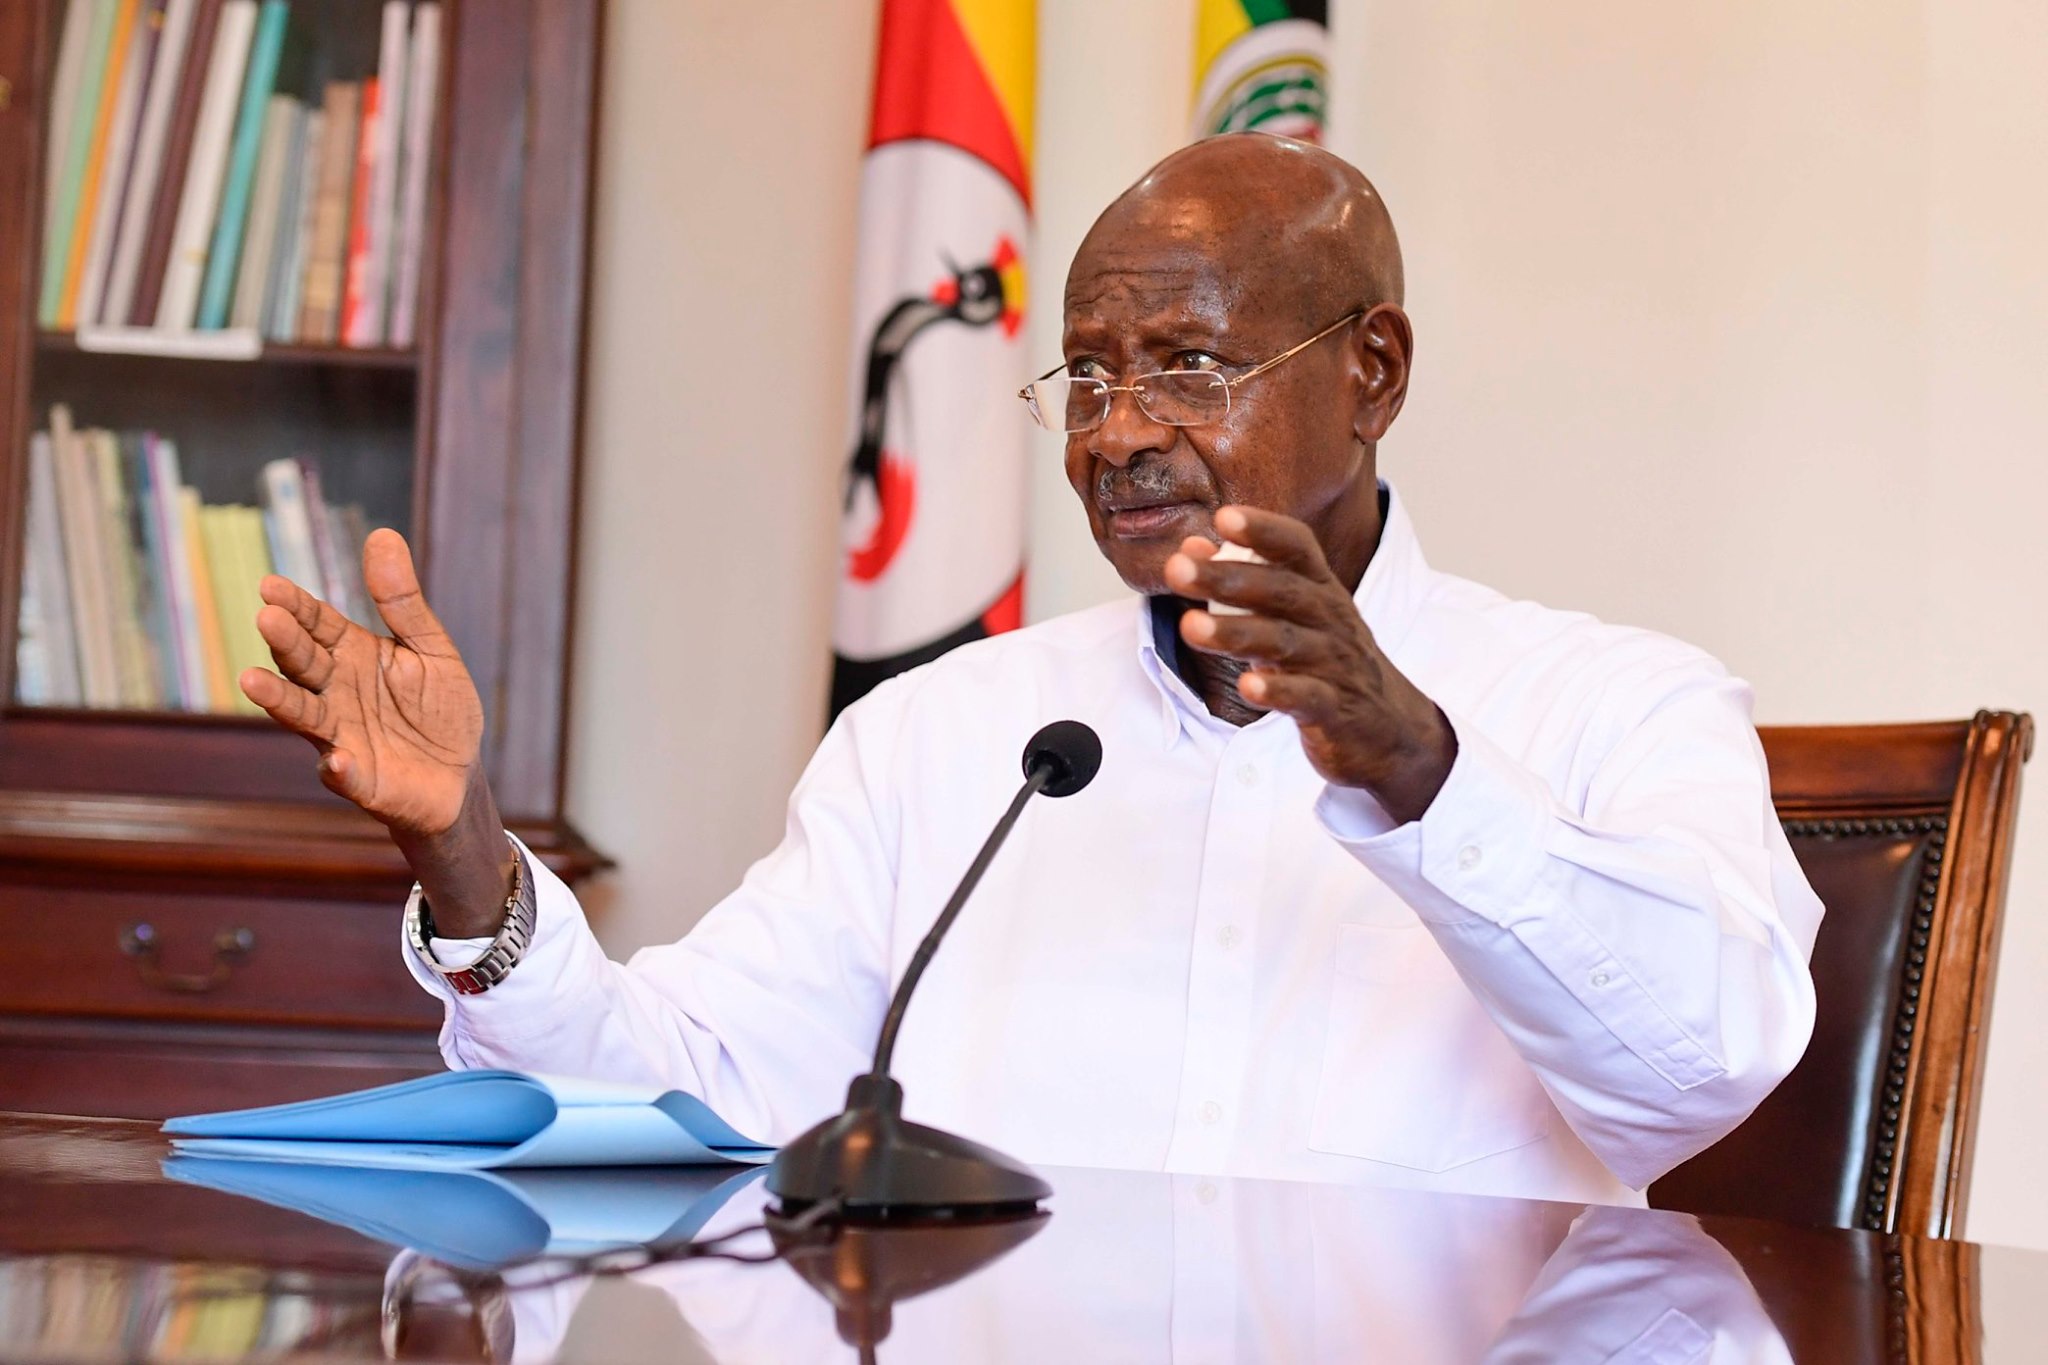 Museveni Orders Release Of People Arrested During COVID-19 Lockdown